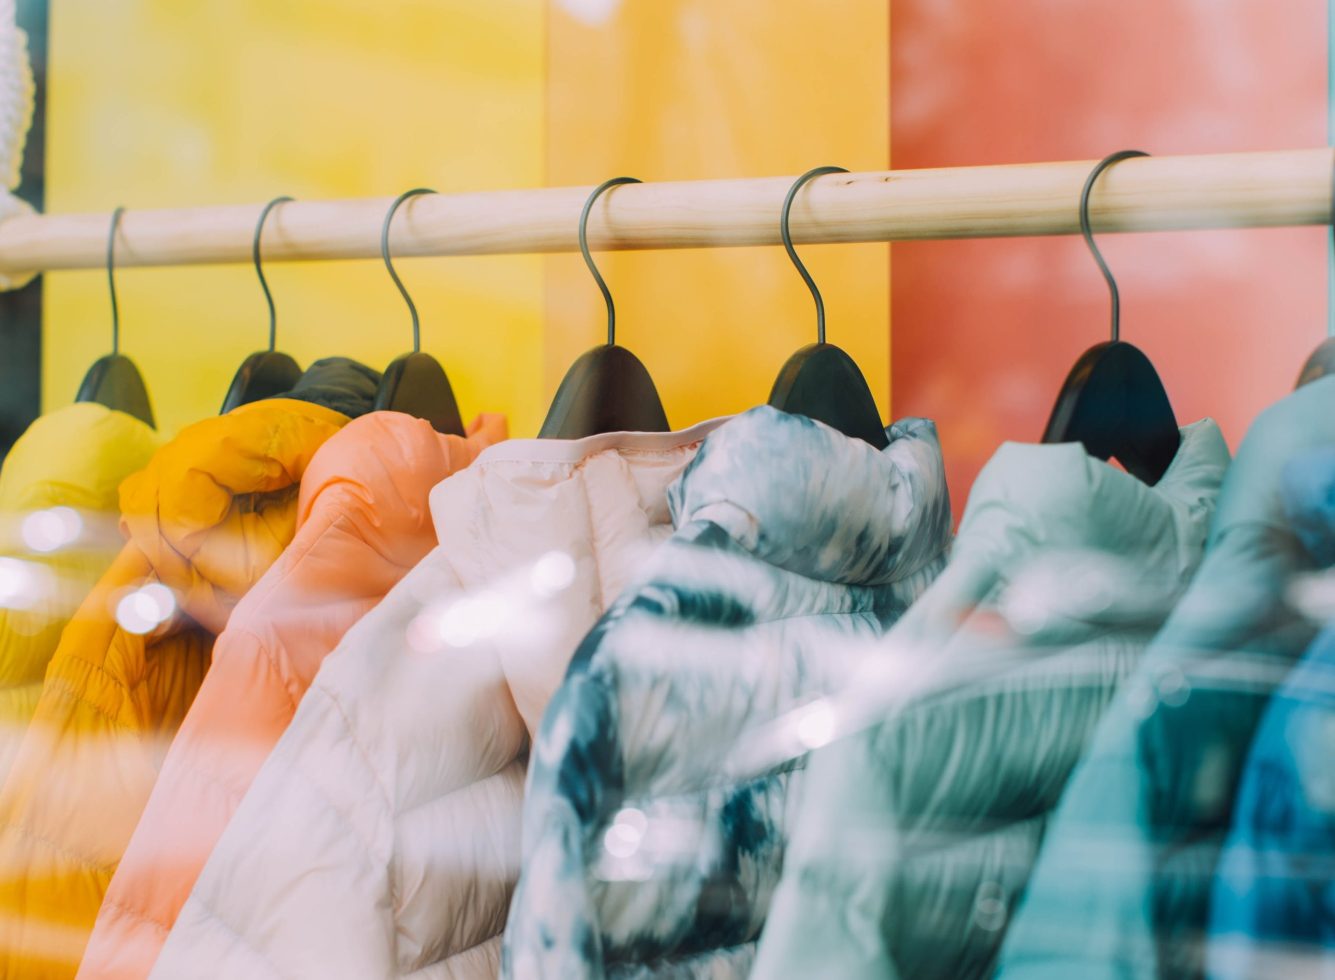 Online clothing sales to overtake in-store in 2022